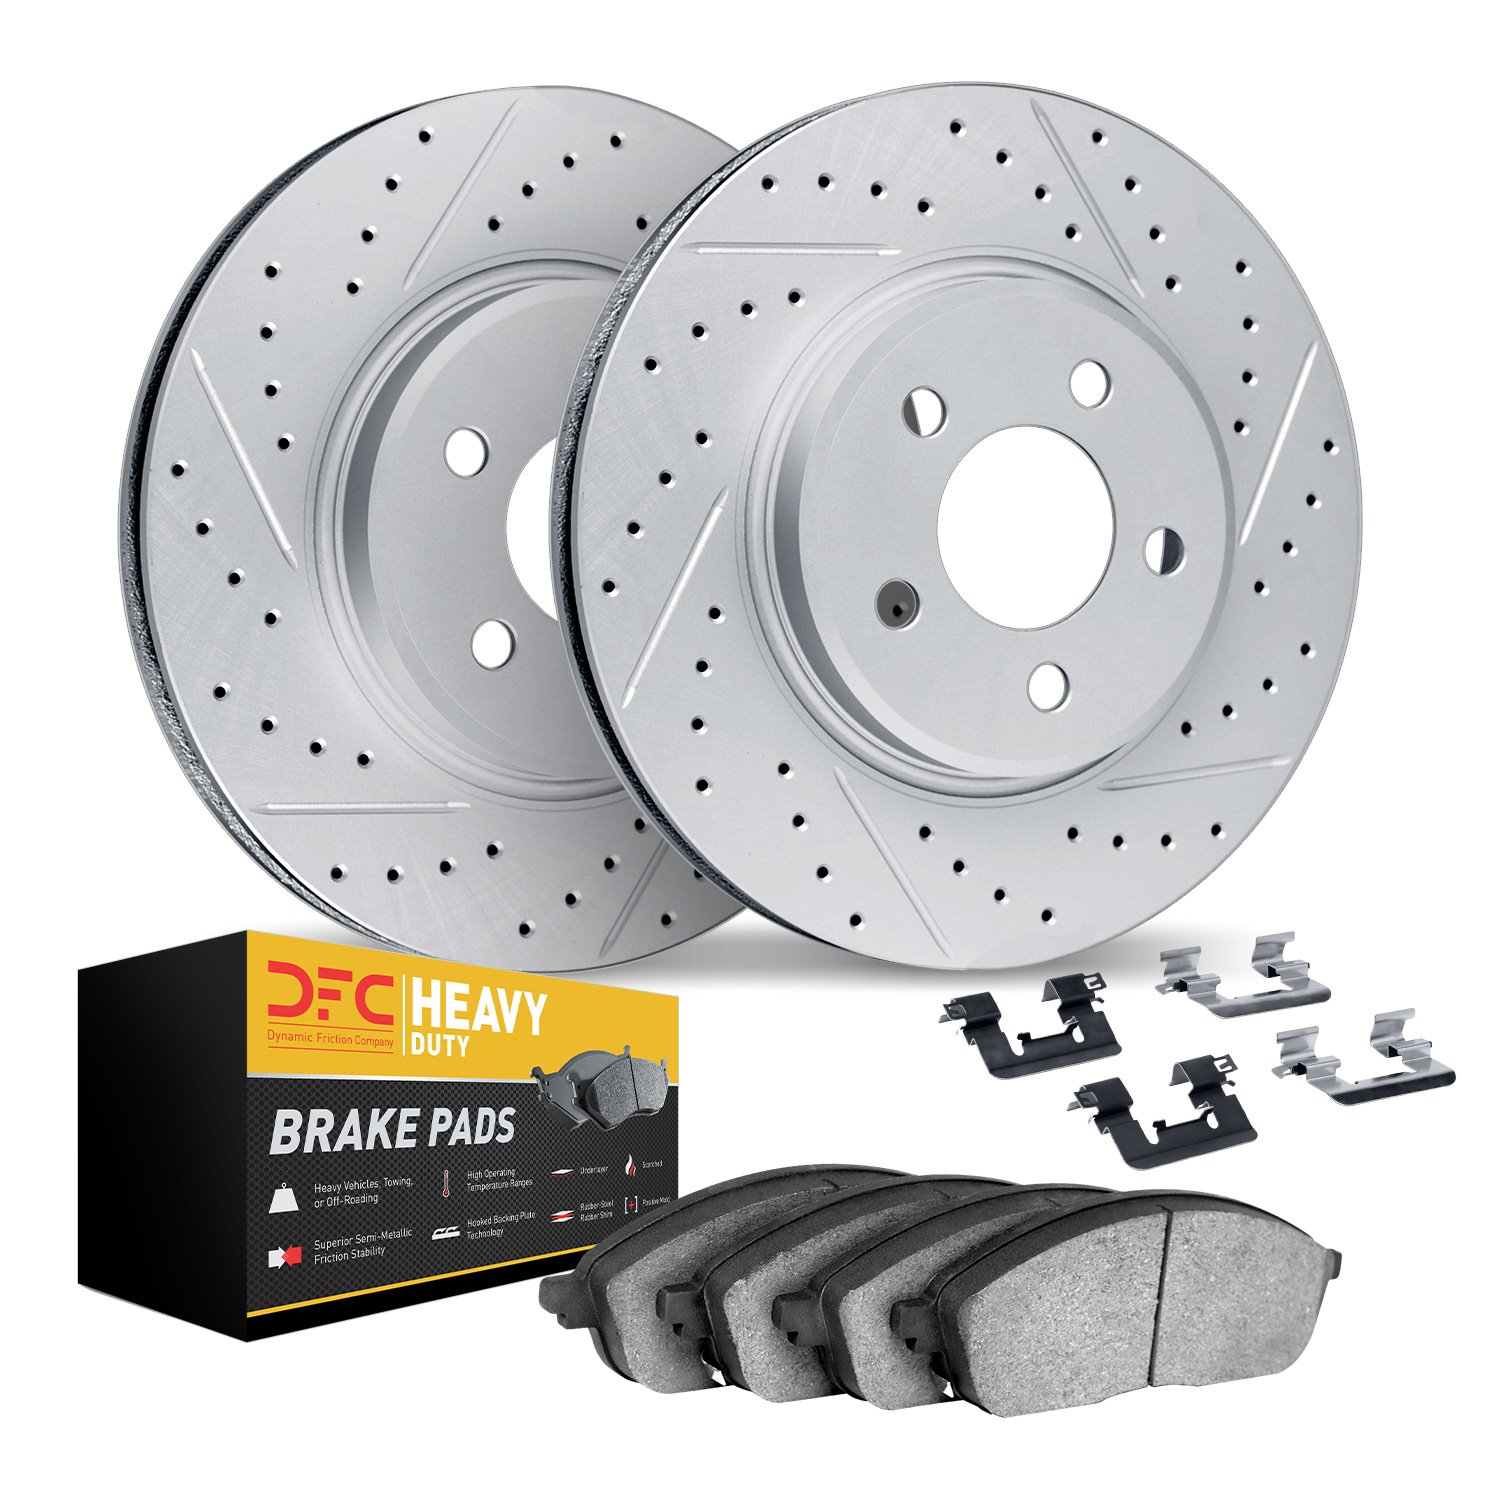 2212-99092 Geoperformance Drilled/Slotted Rotors w/Heavy-Duty Pads Kit & Hardware, 1997-1999 Ford/Lincoln/Mercury/Mazda, Positio